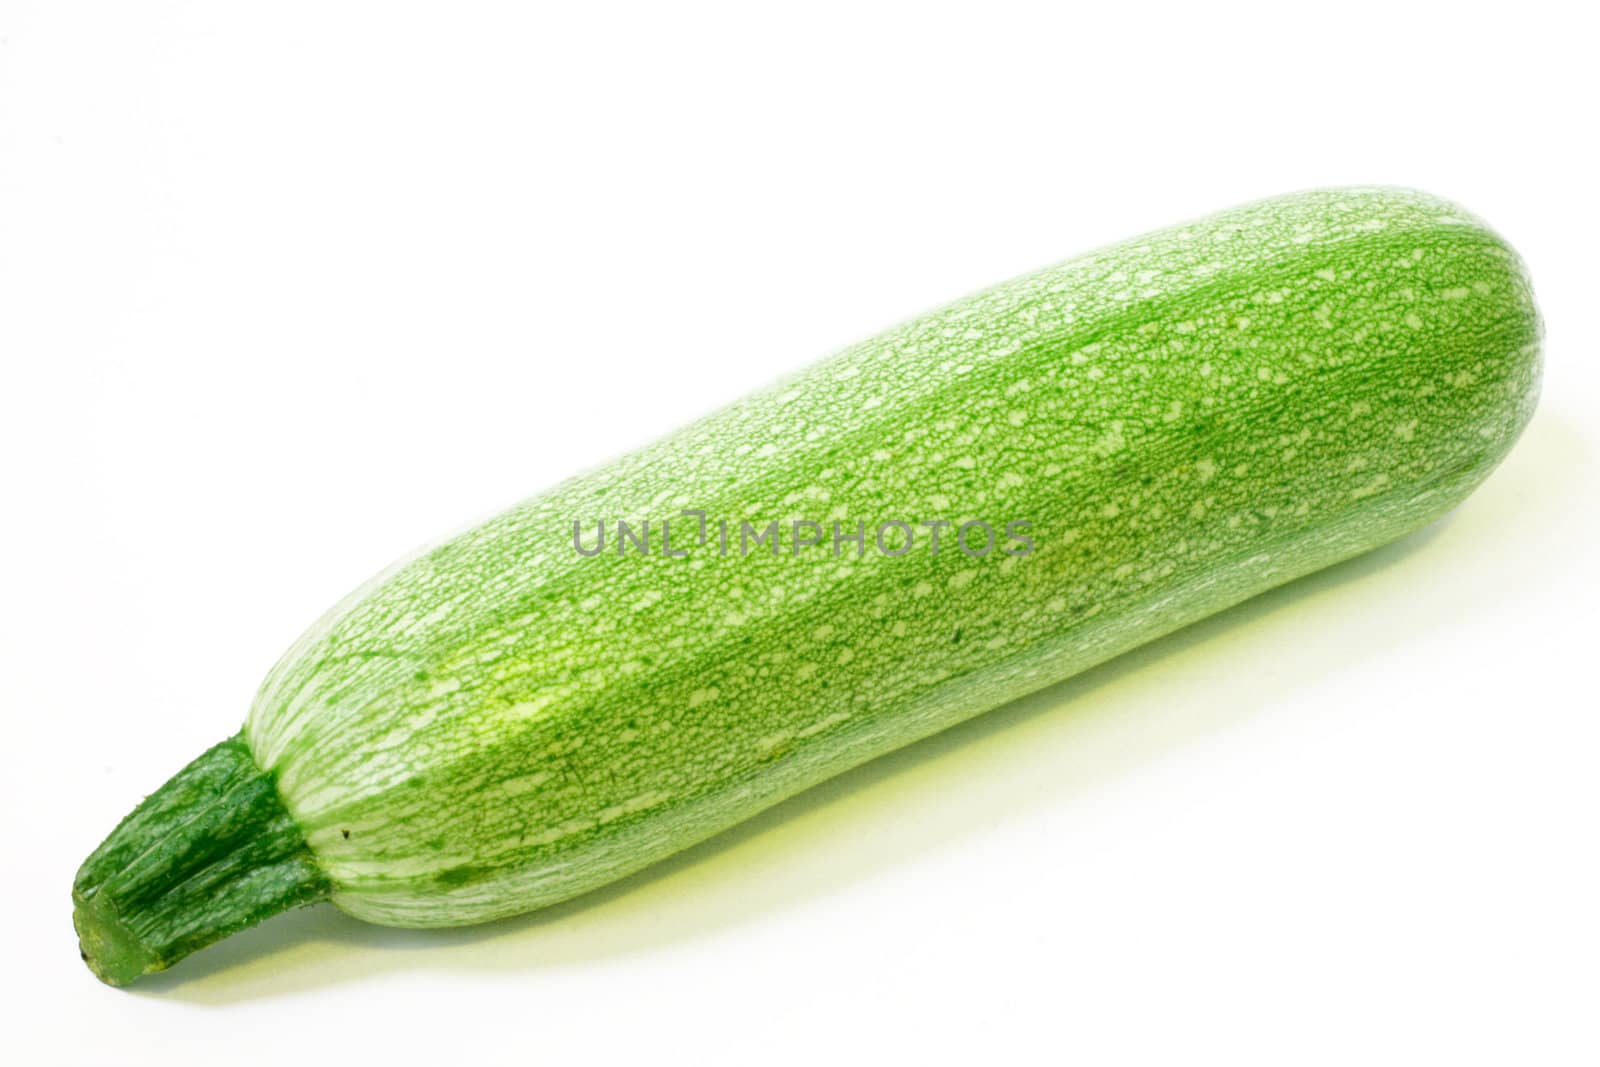 marrow squash at the white background